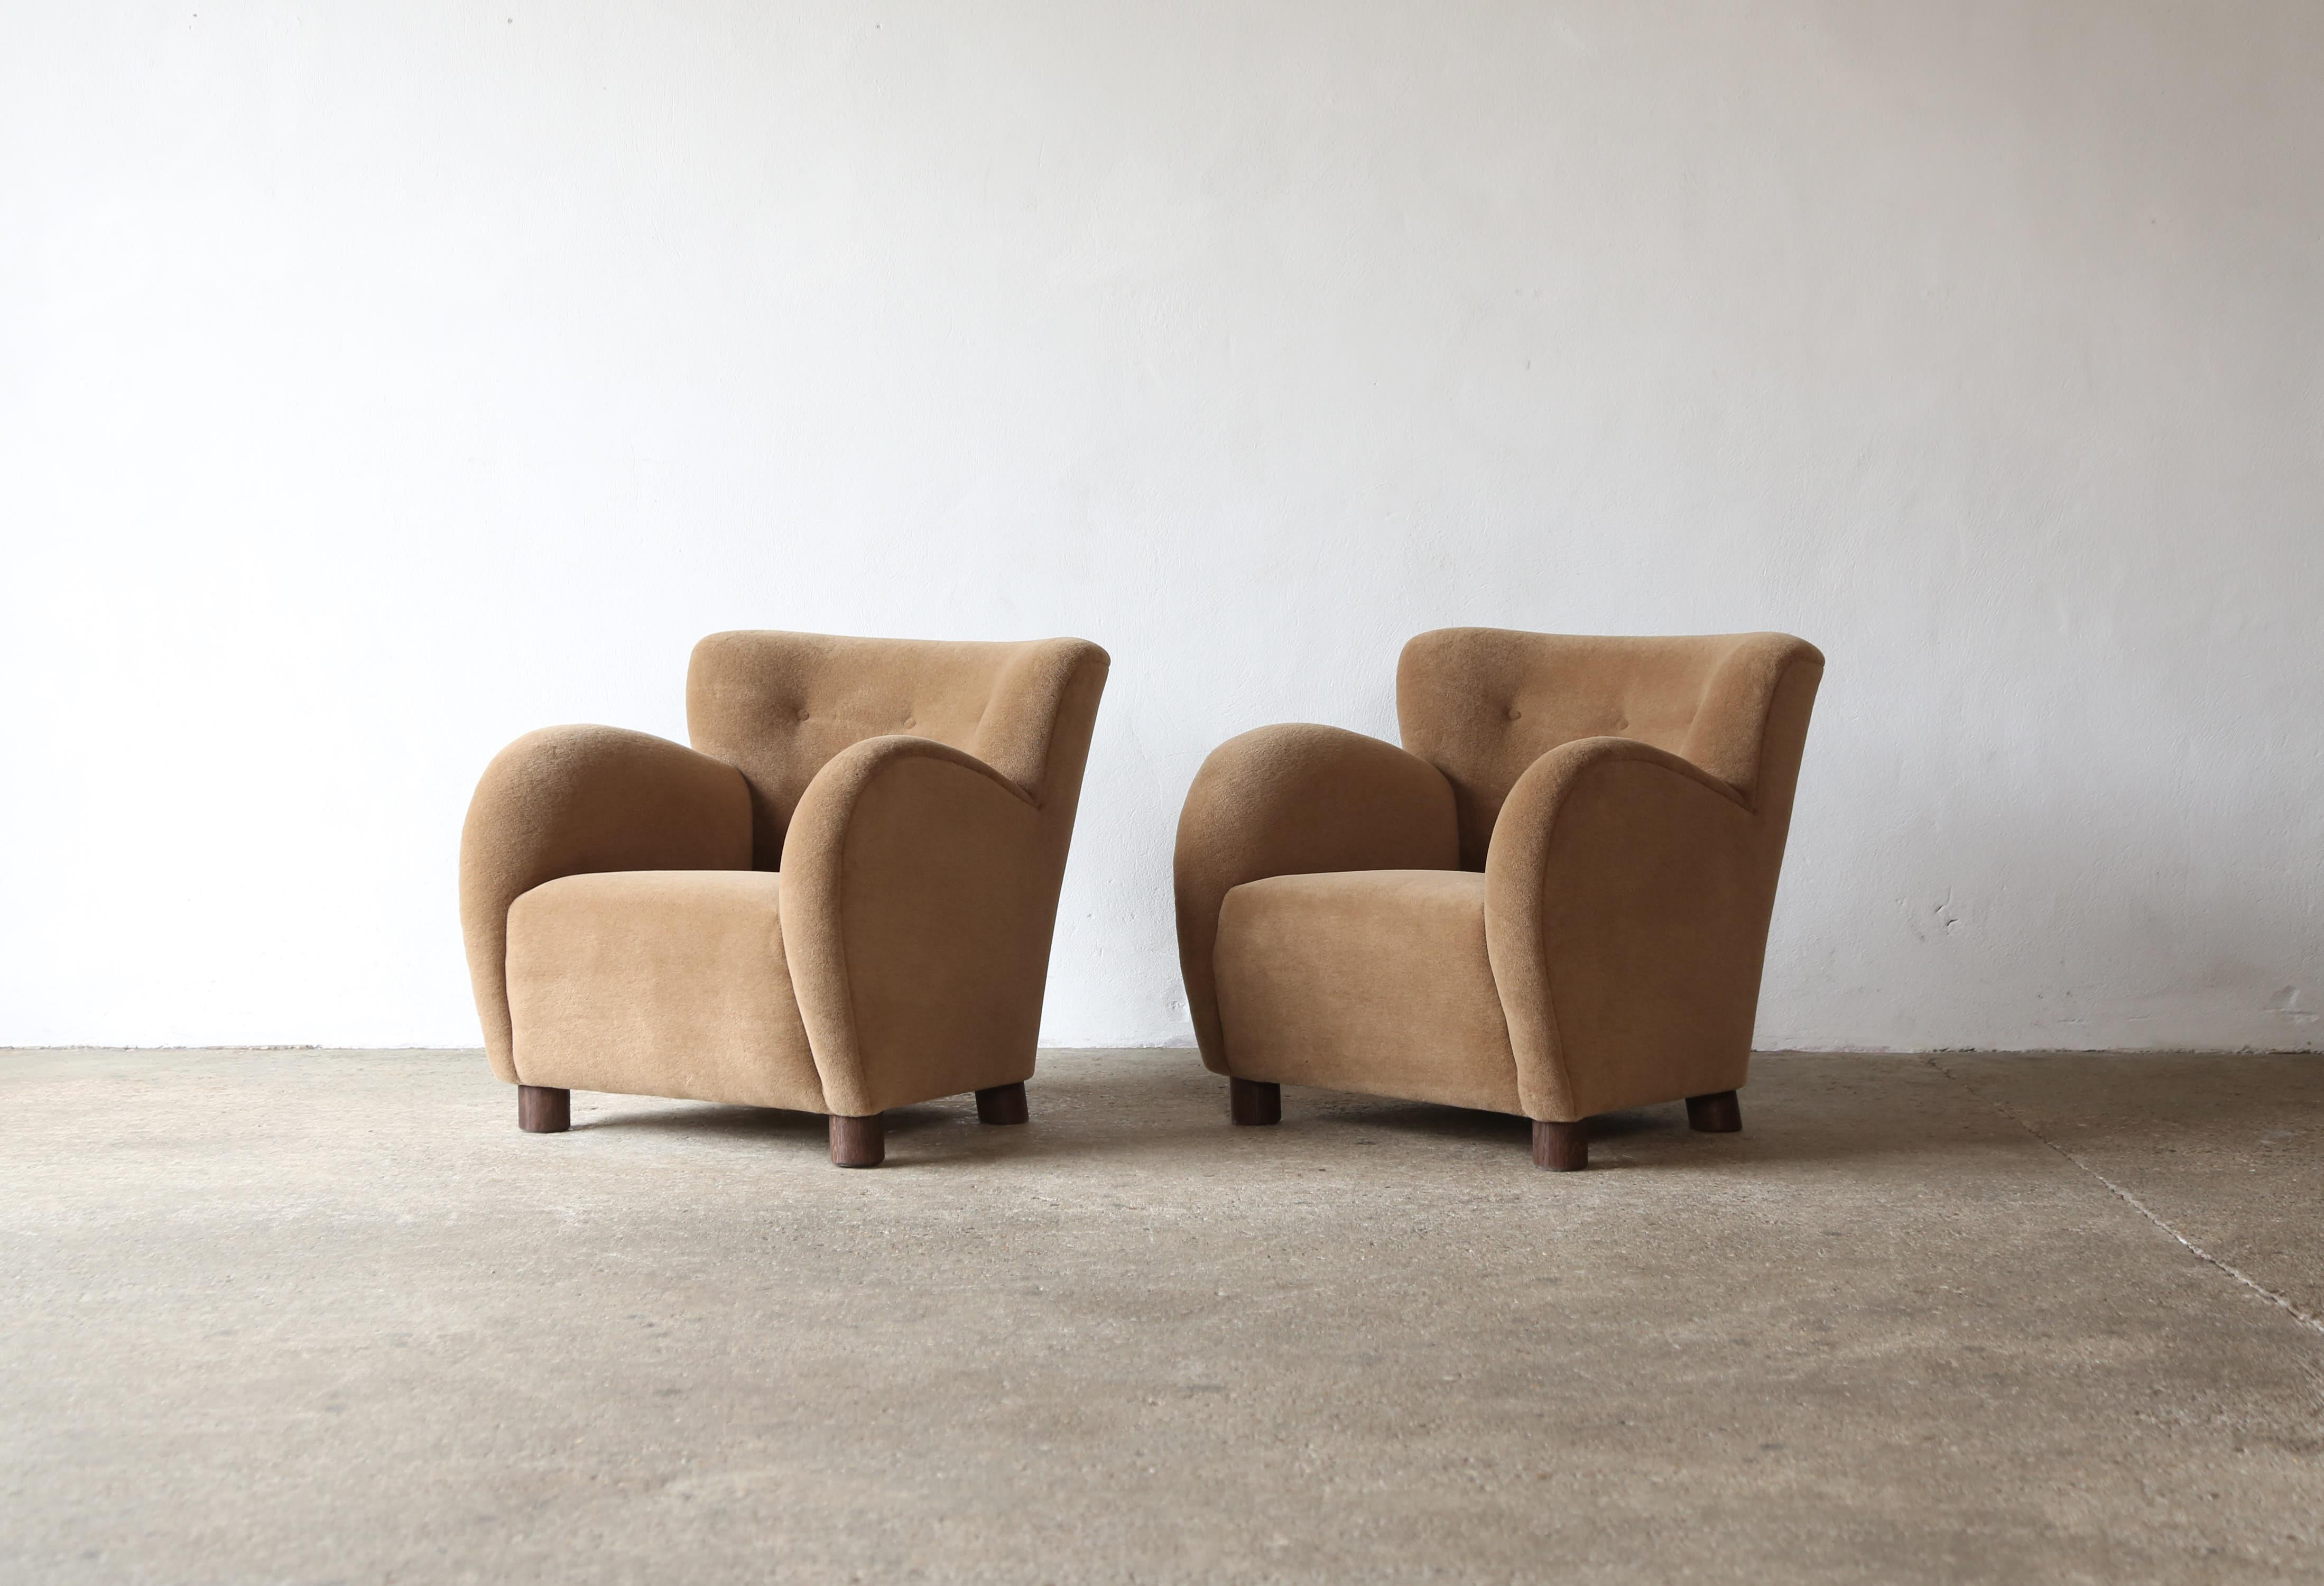 A superb pair of modern round arm Danish-style armchairs. Handmade beech frames, sprung seat and newly upholstered in a premium, golden brown, soft, pure alpaca wool fabric with solid oak feet. Fast shipping worldwide.



